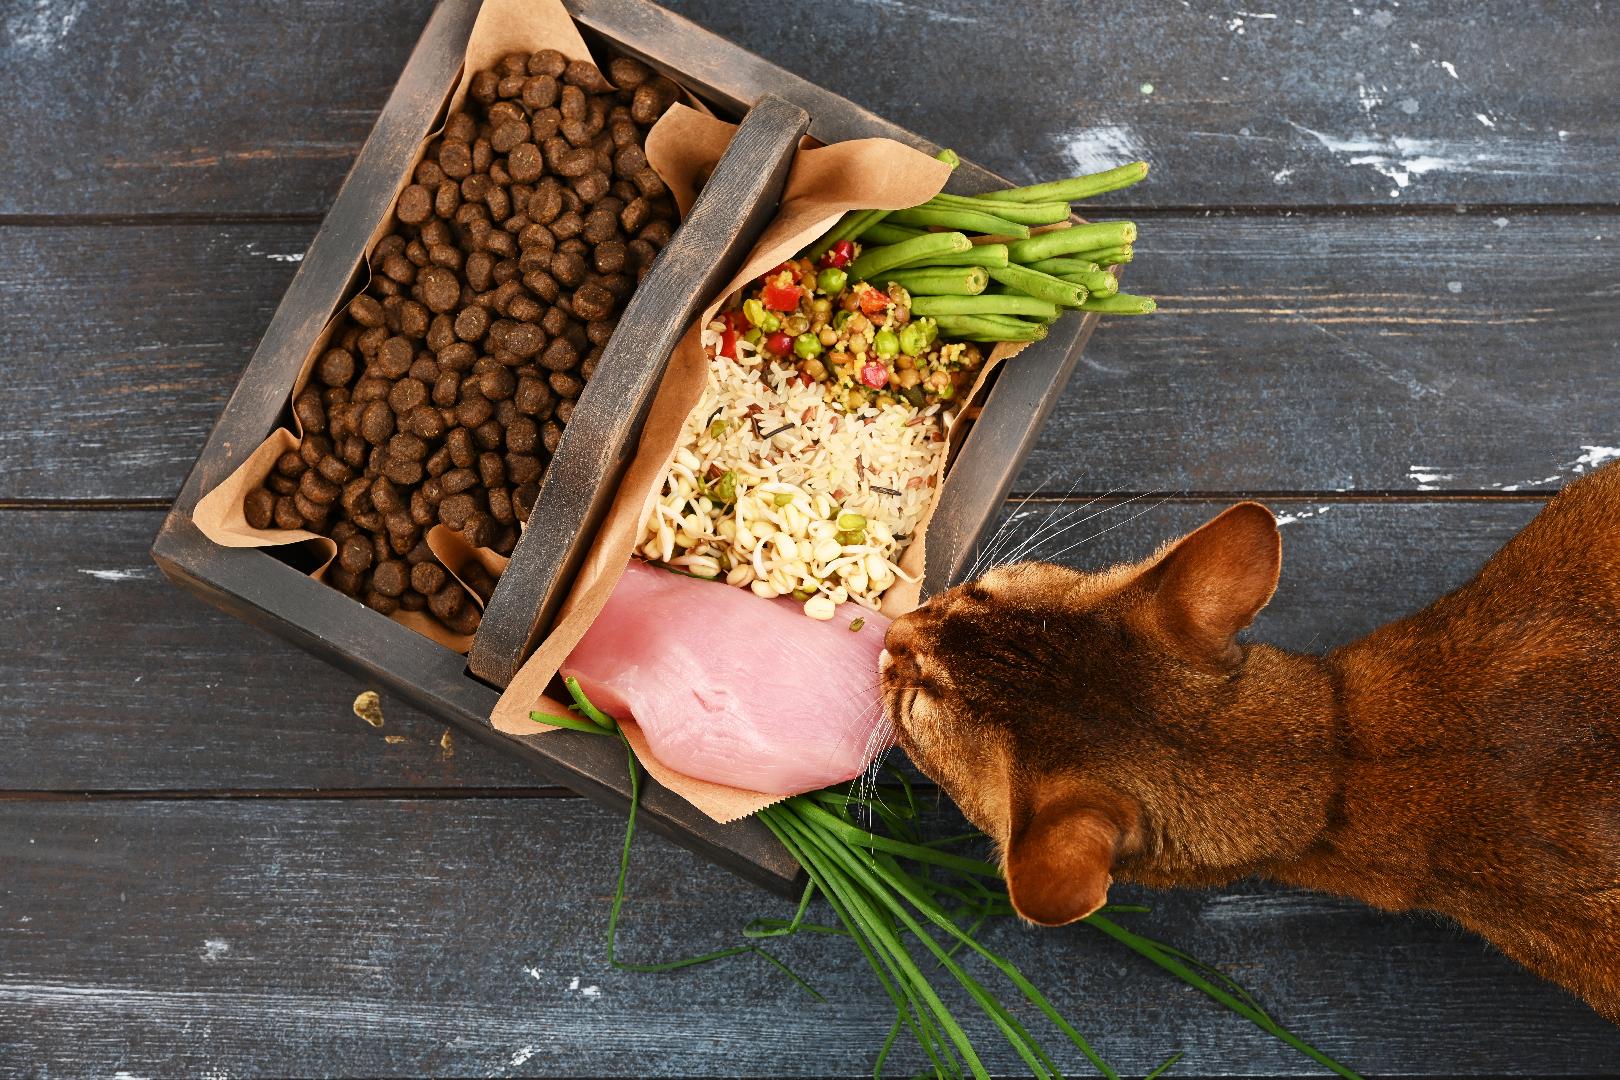 What is the most important ingredient in Pet Food?